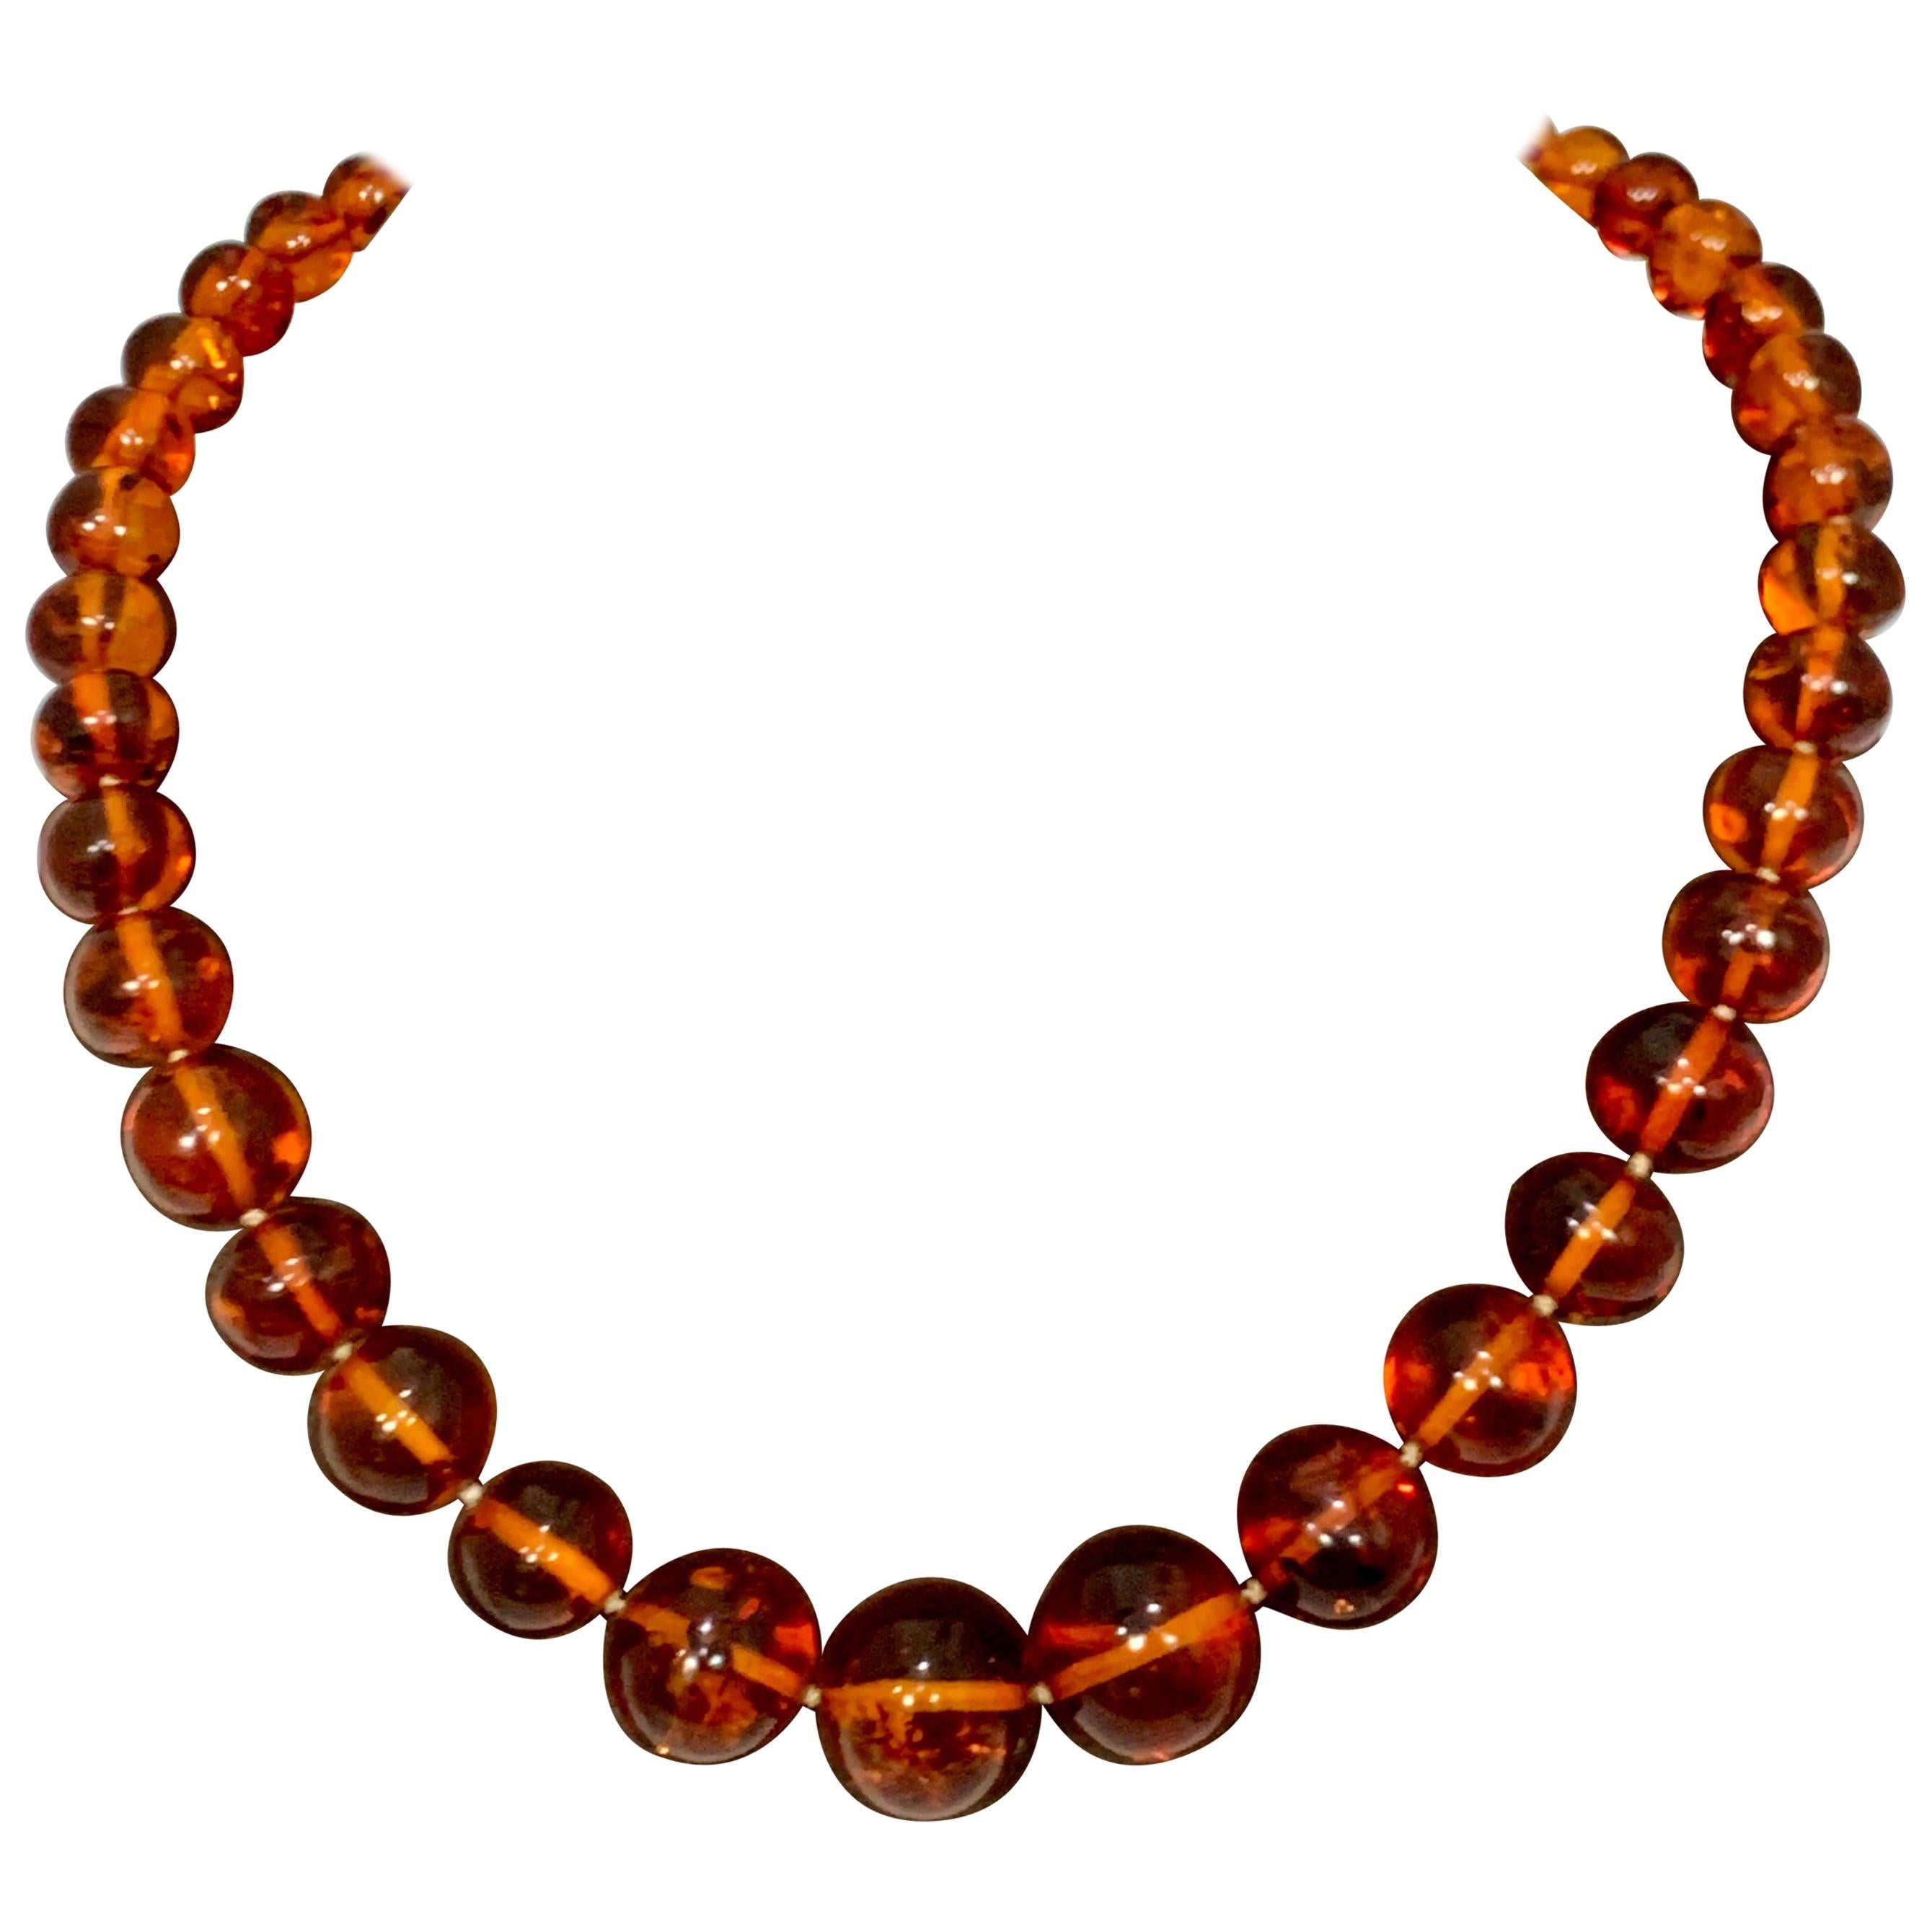 250 Ct Natural Amber Single Strand Graduating Bead Necklace with 18K Gold Clasp